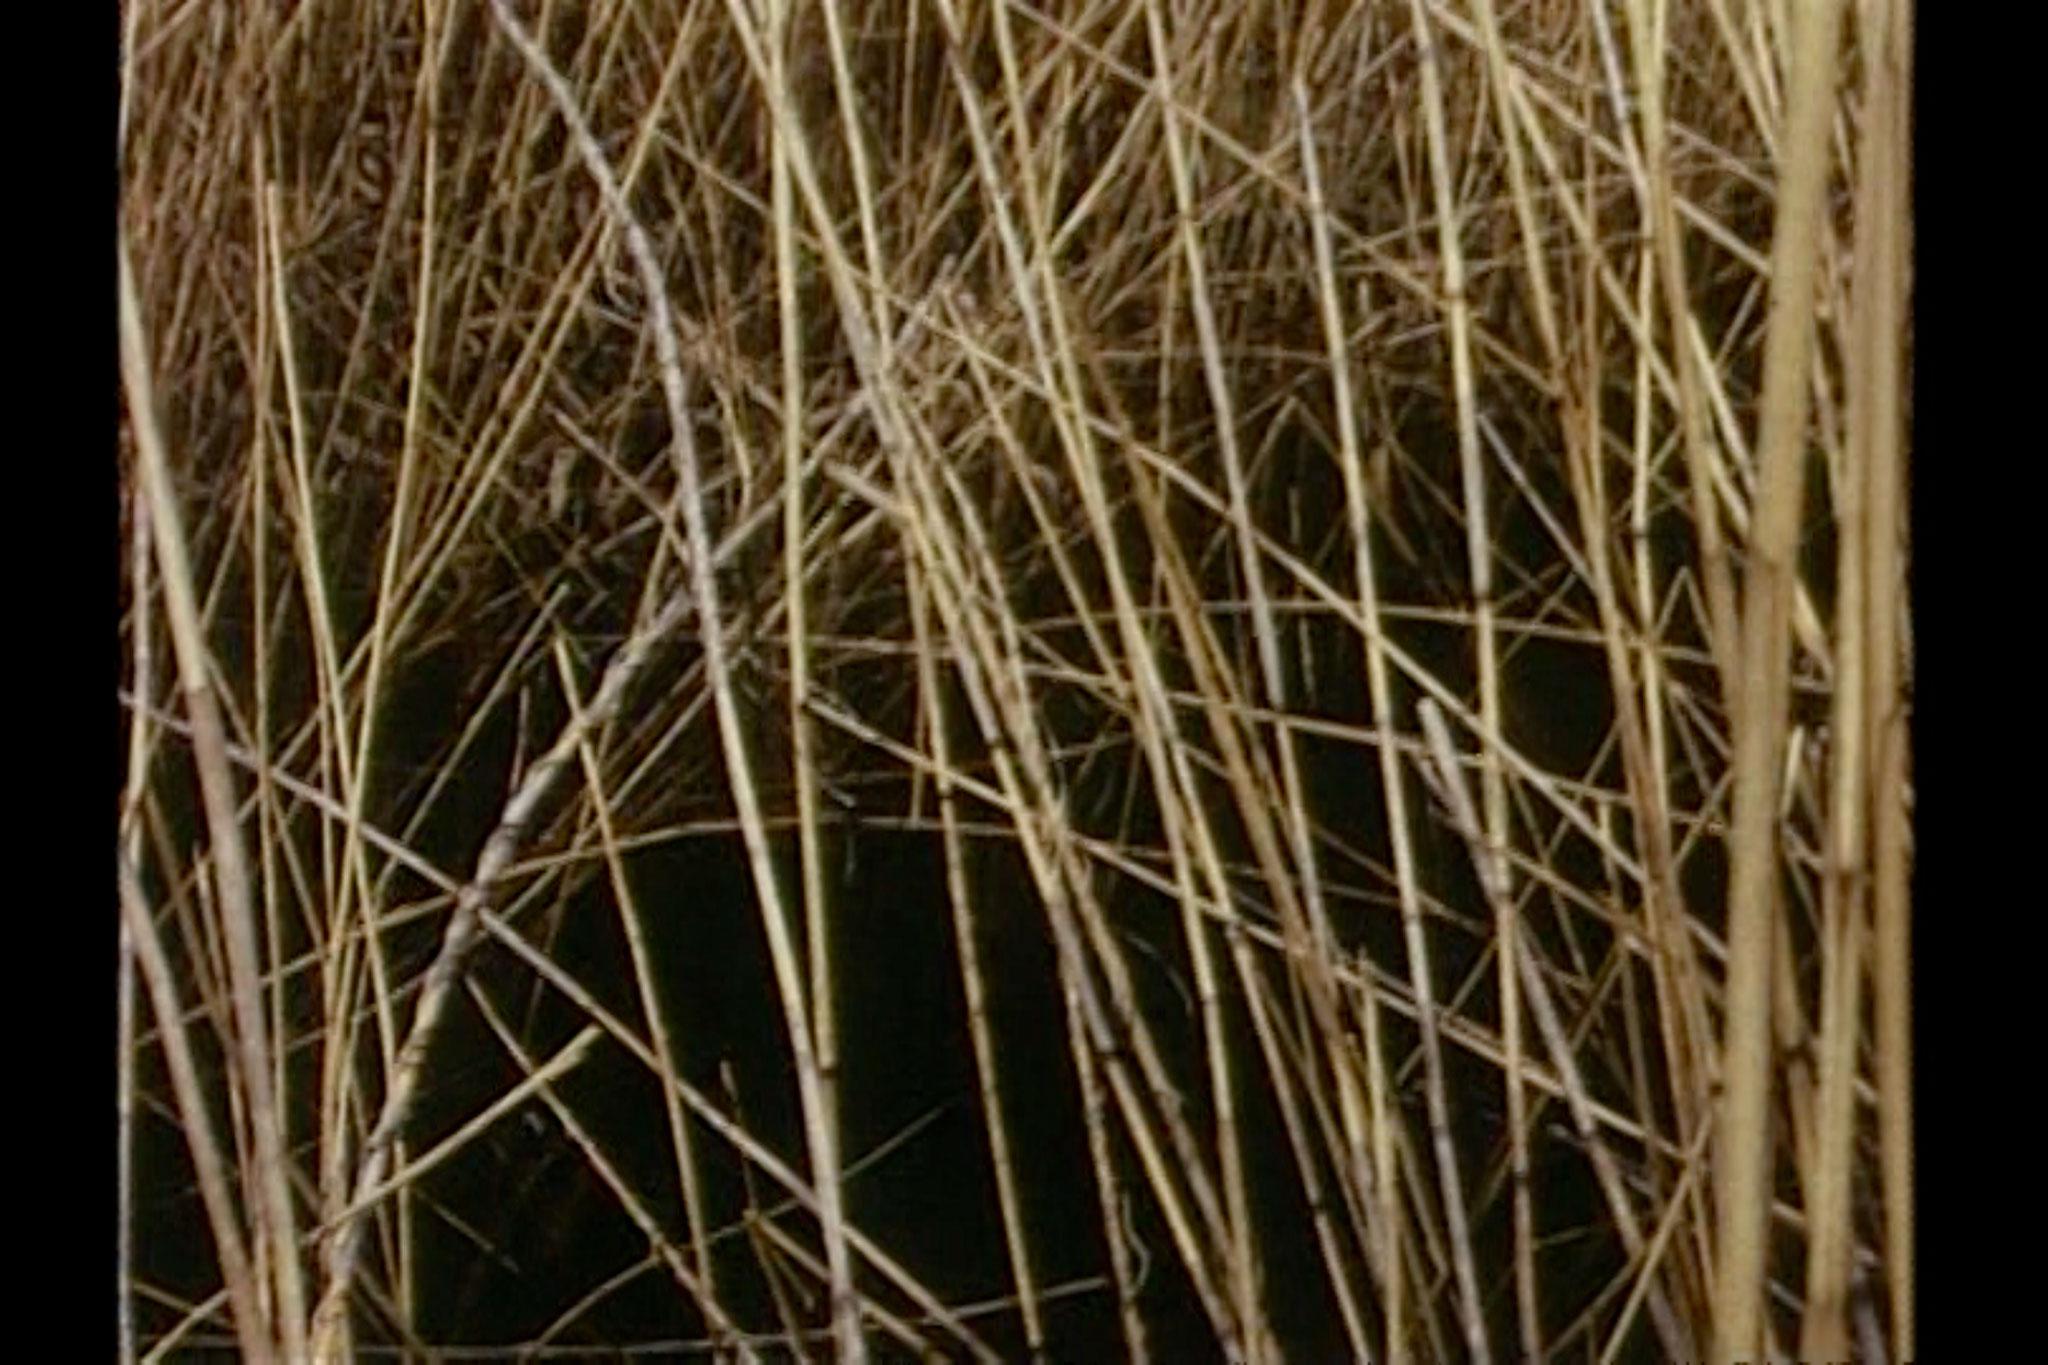 Chaotic image of many criss-crossing reeds with a dark shadowy background.